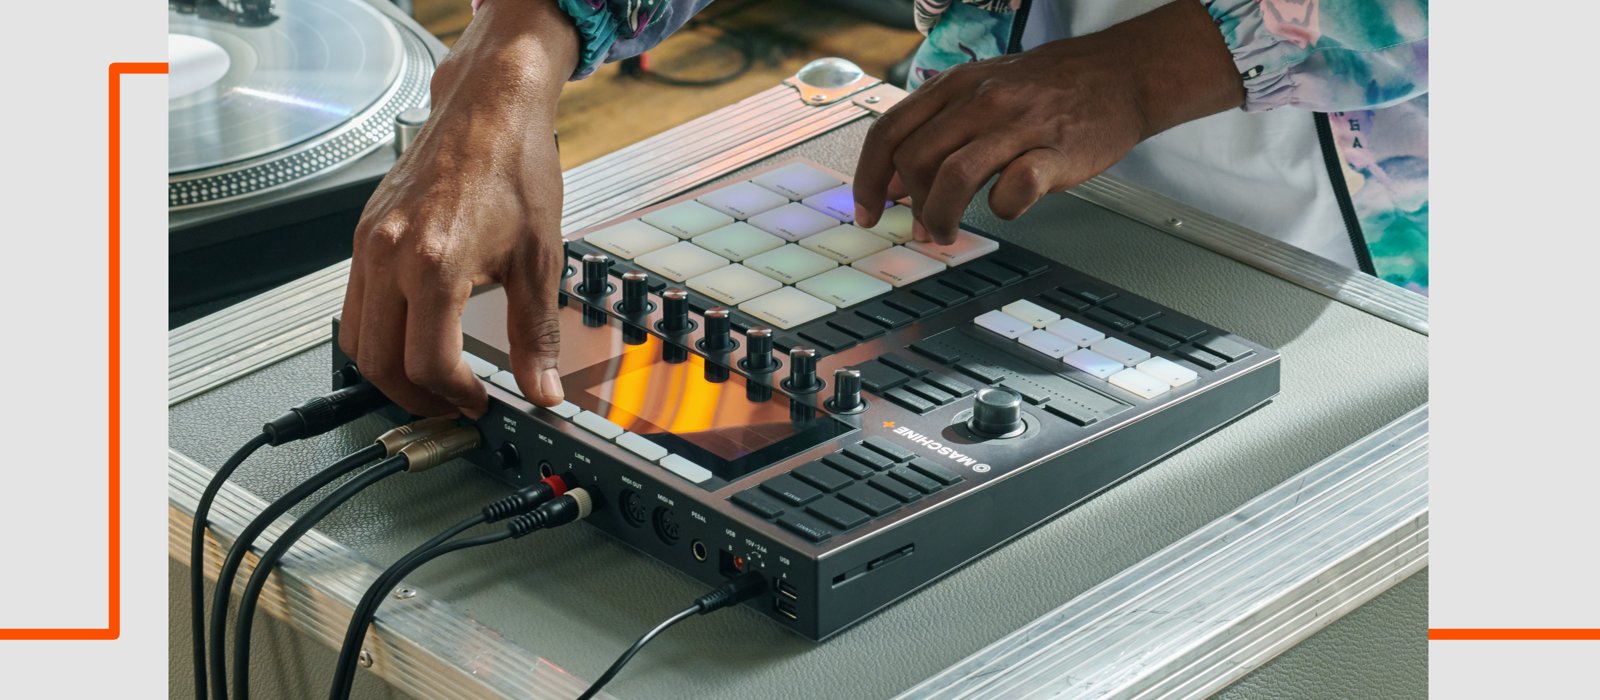 Native Instruments launches Maschine+ as standalone hardware on October 1